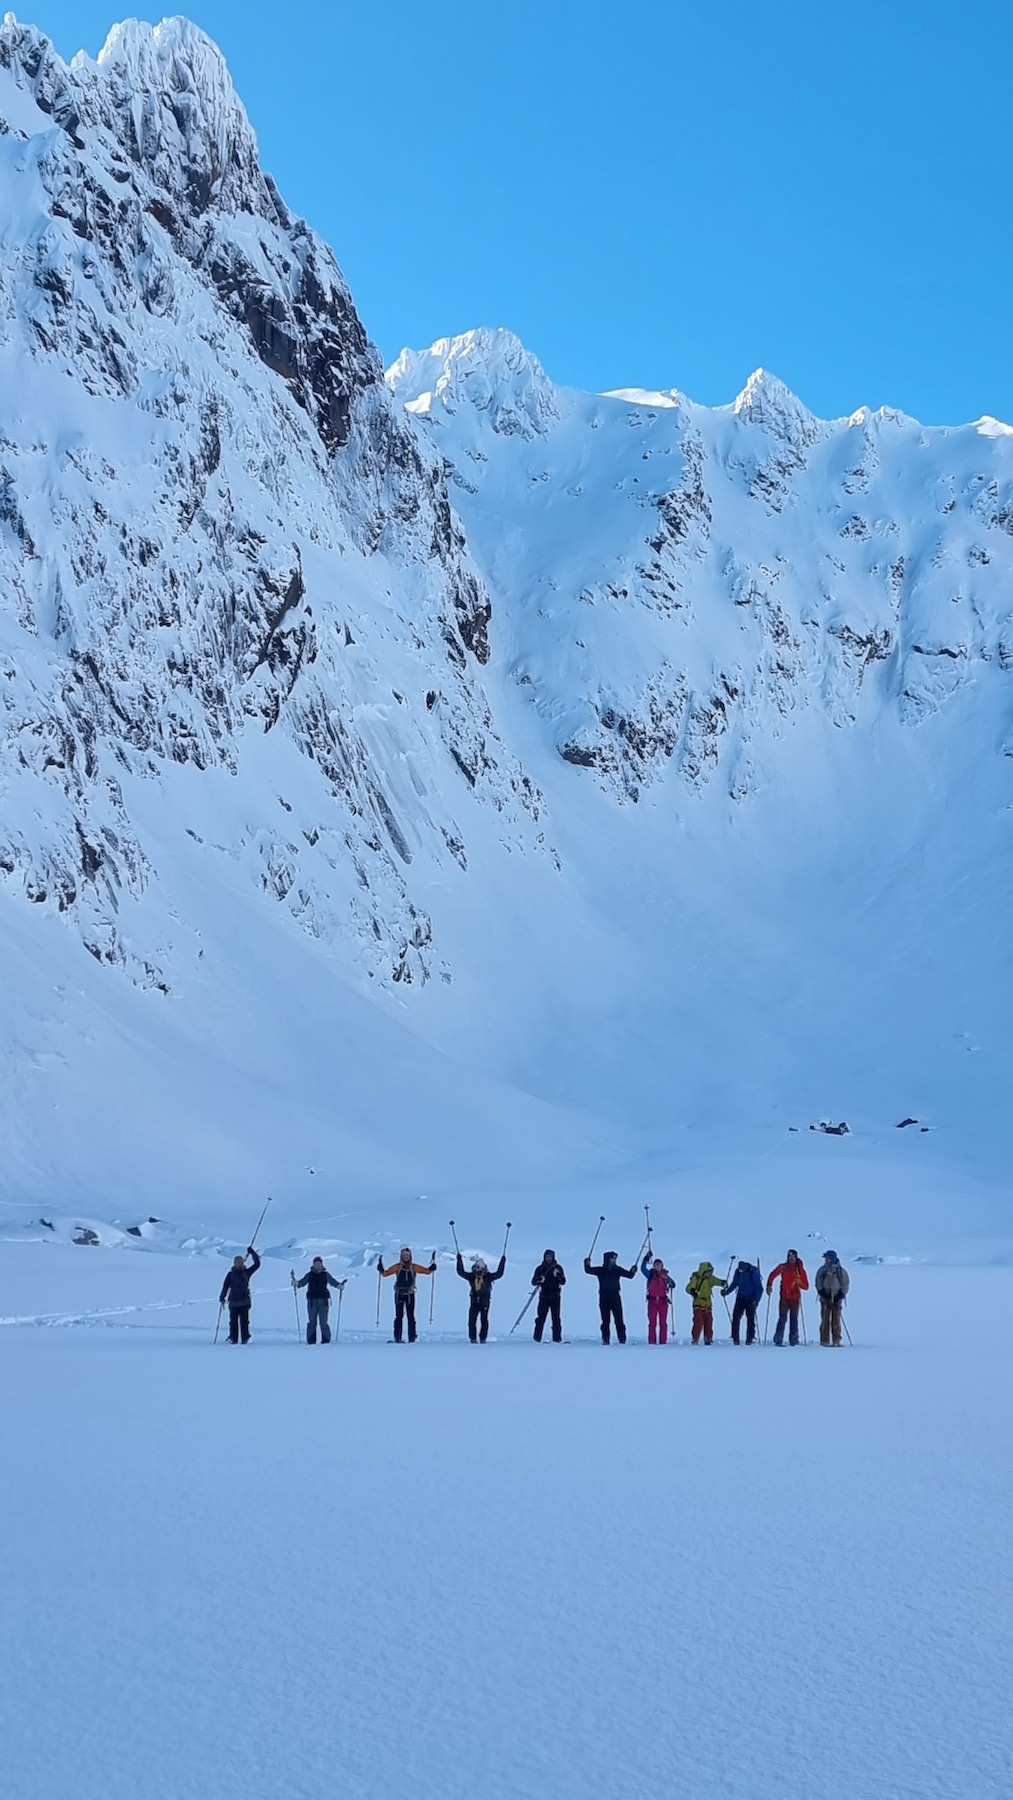 Our group and the four locals we joined up with. En route to the troll fjord after descending the mountains in the background